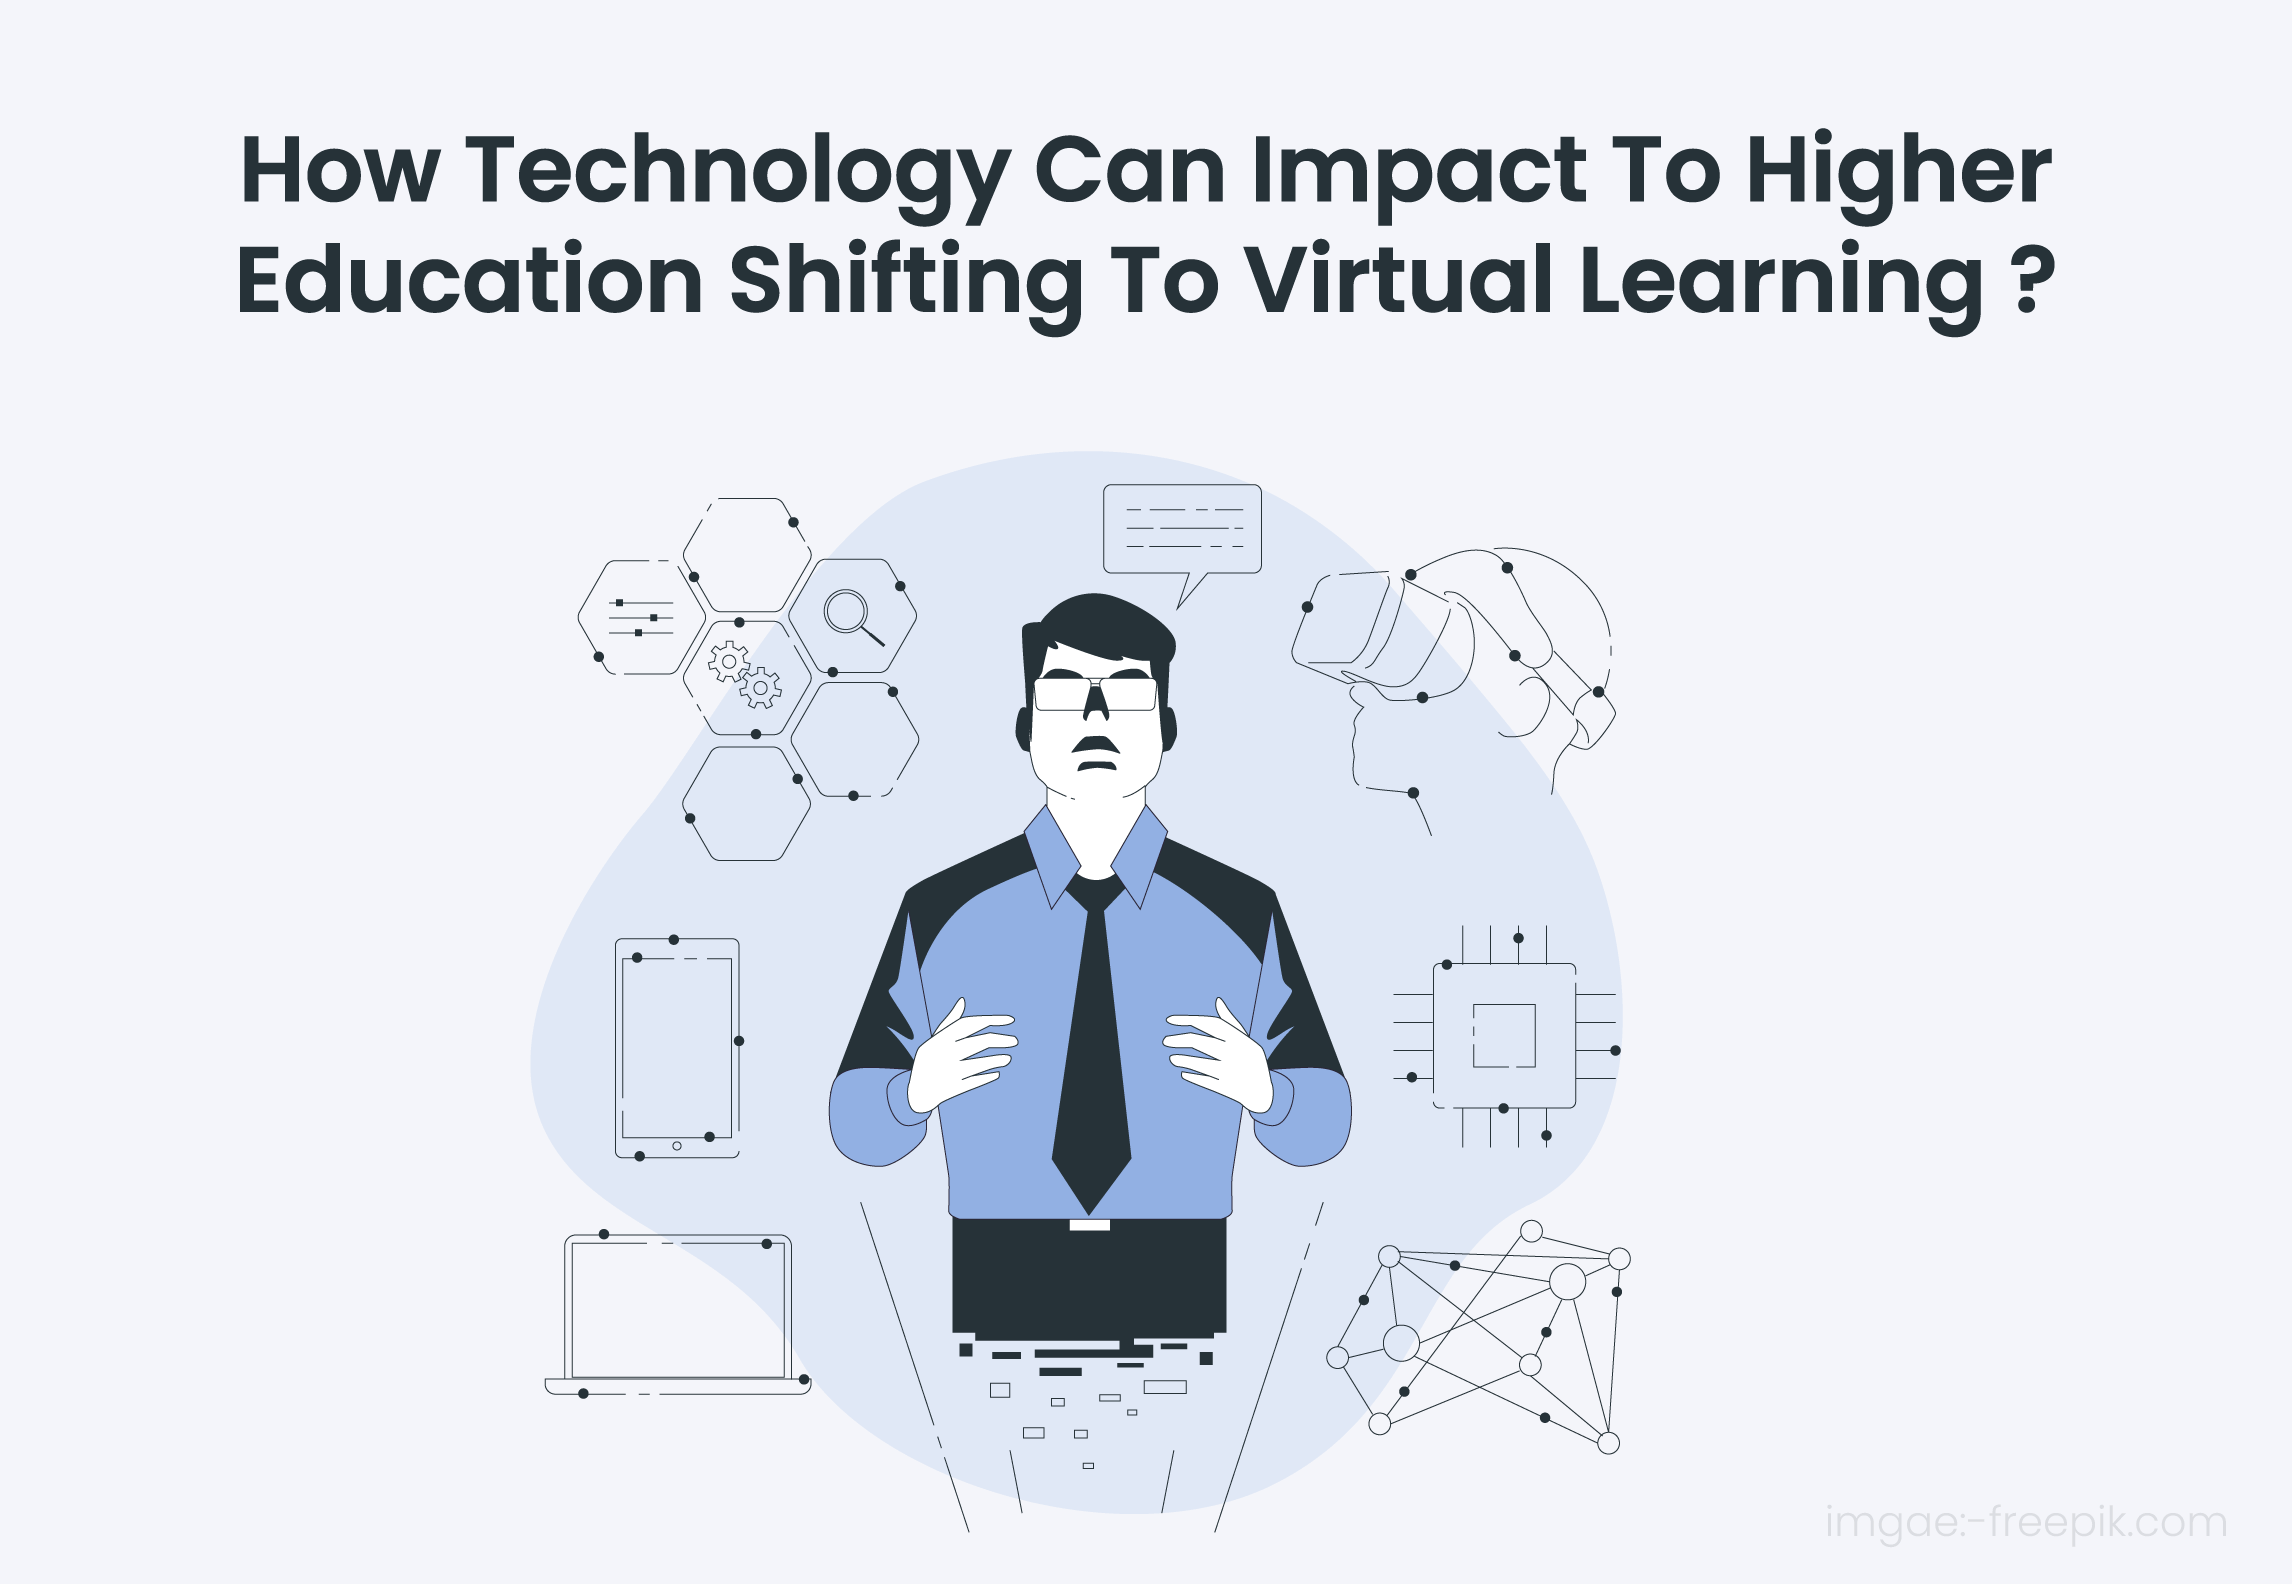 ‌How‌ ‌technology‌ ‌can‌ ‌impact‌ ‌to‌ ‌higher‌ ‌education‌ ‌shifting‌ ‌to‌ ‌virtual‌ ‌learning‌